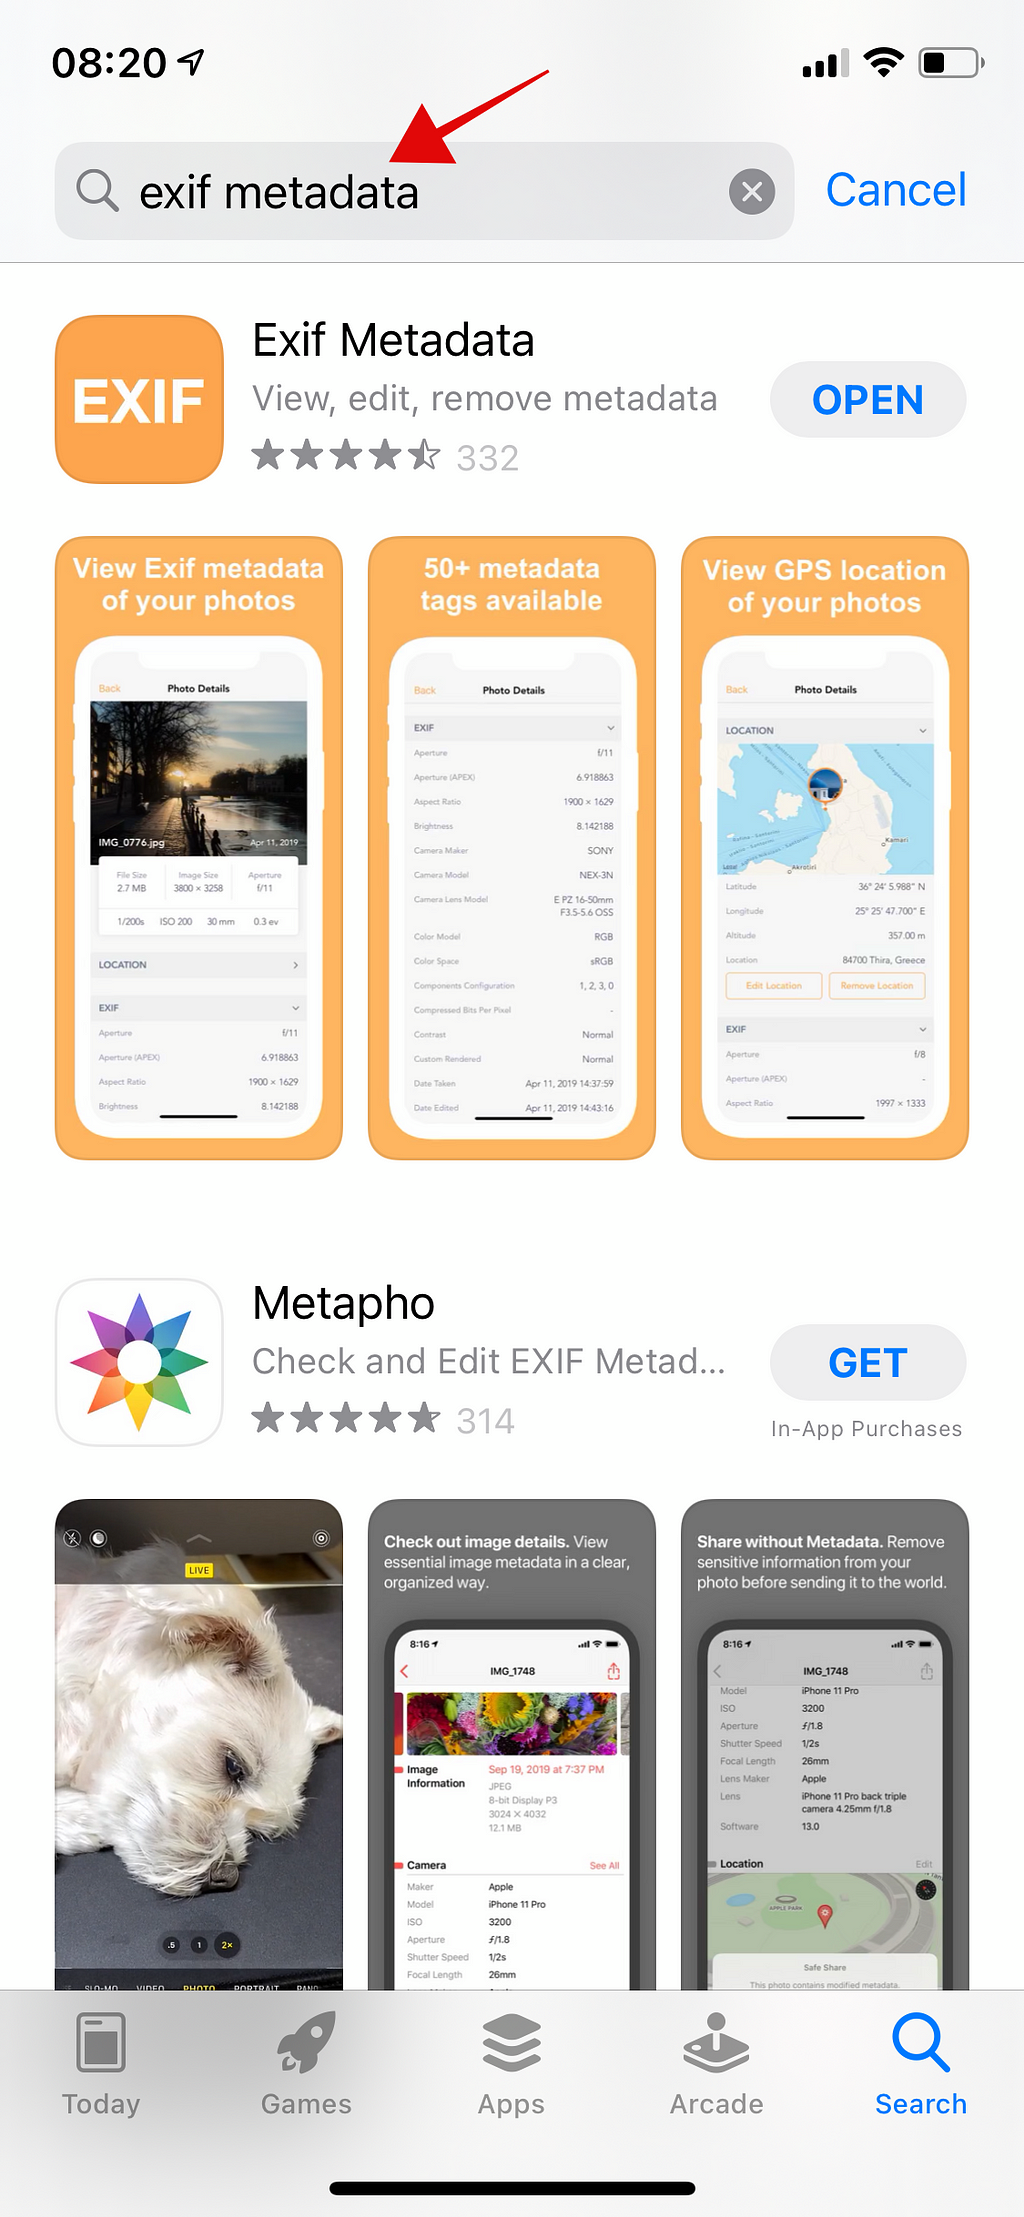 Go to App store and search “exif metadata”